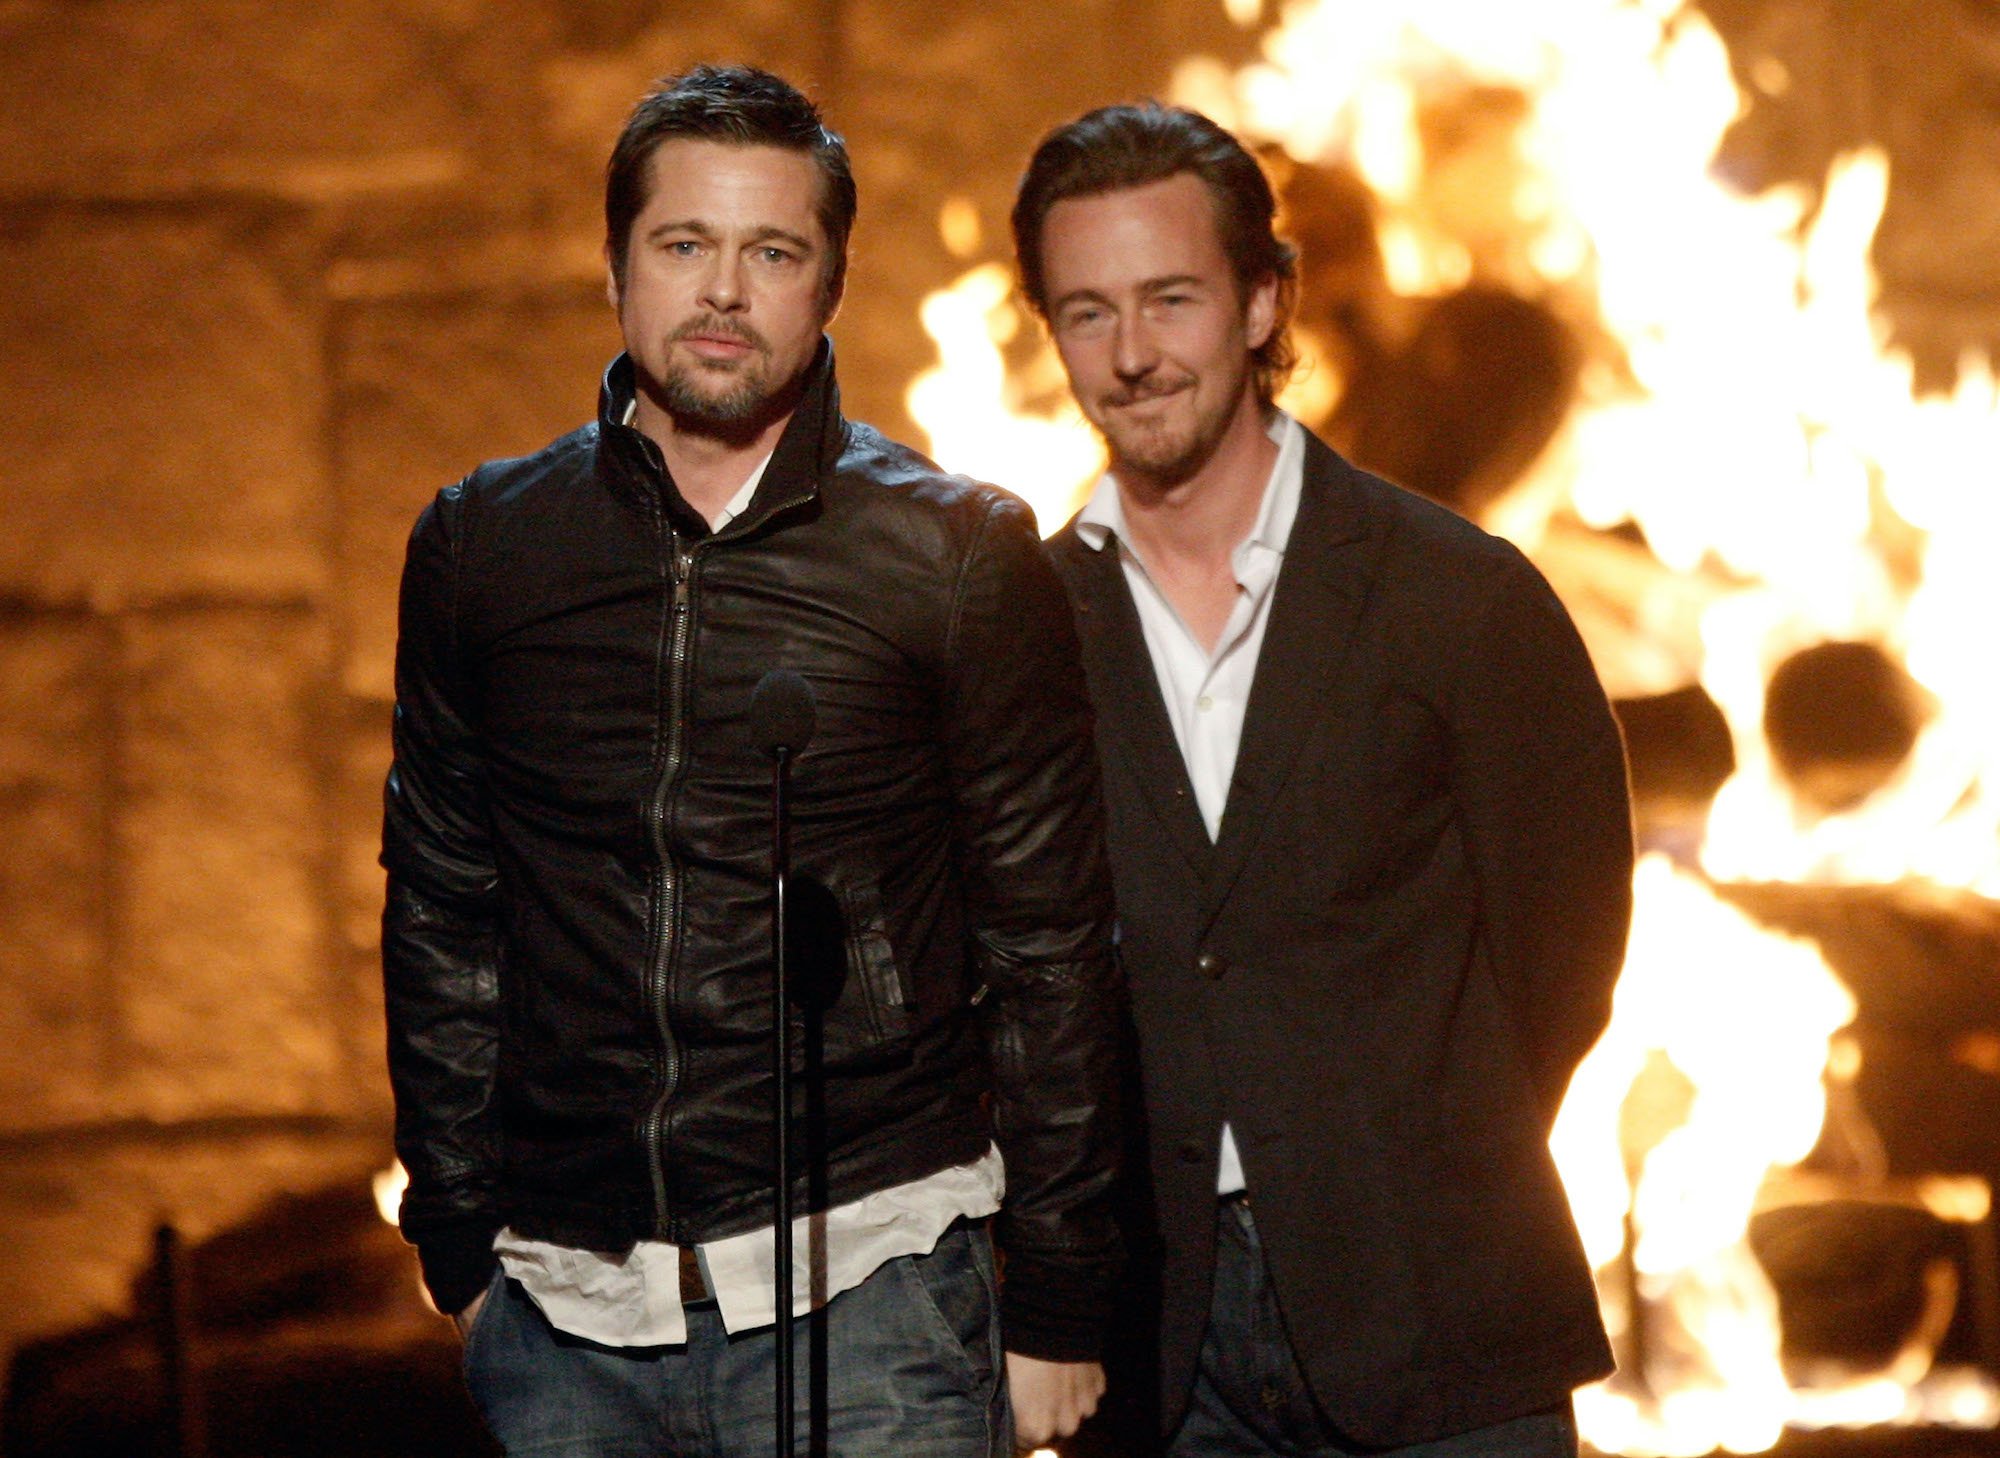 Brad Pitt and Edward Norton behind a microphone, on a stage with a fire in the background